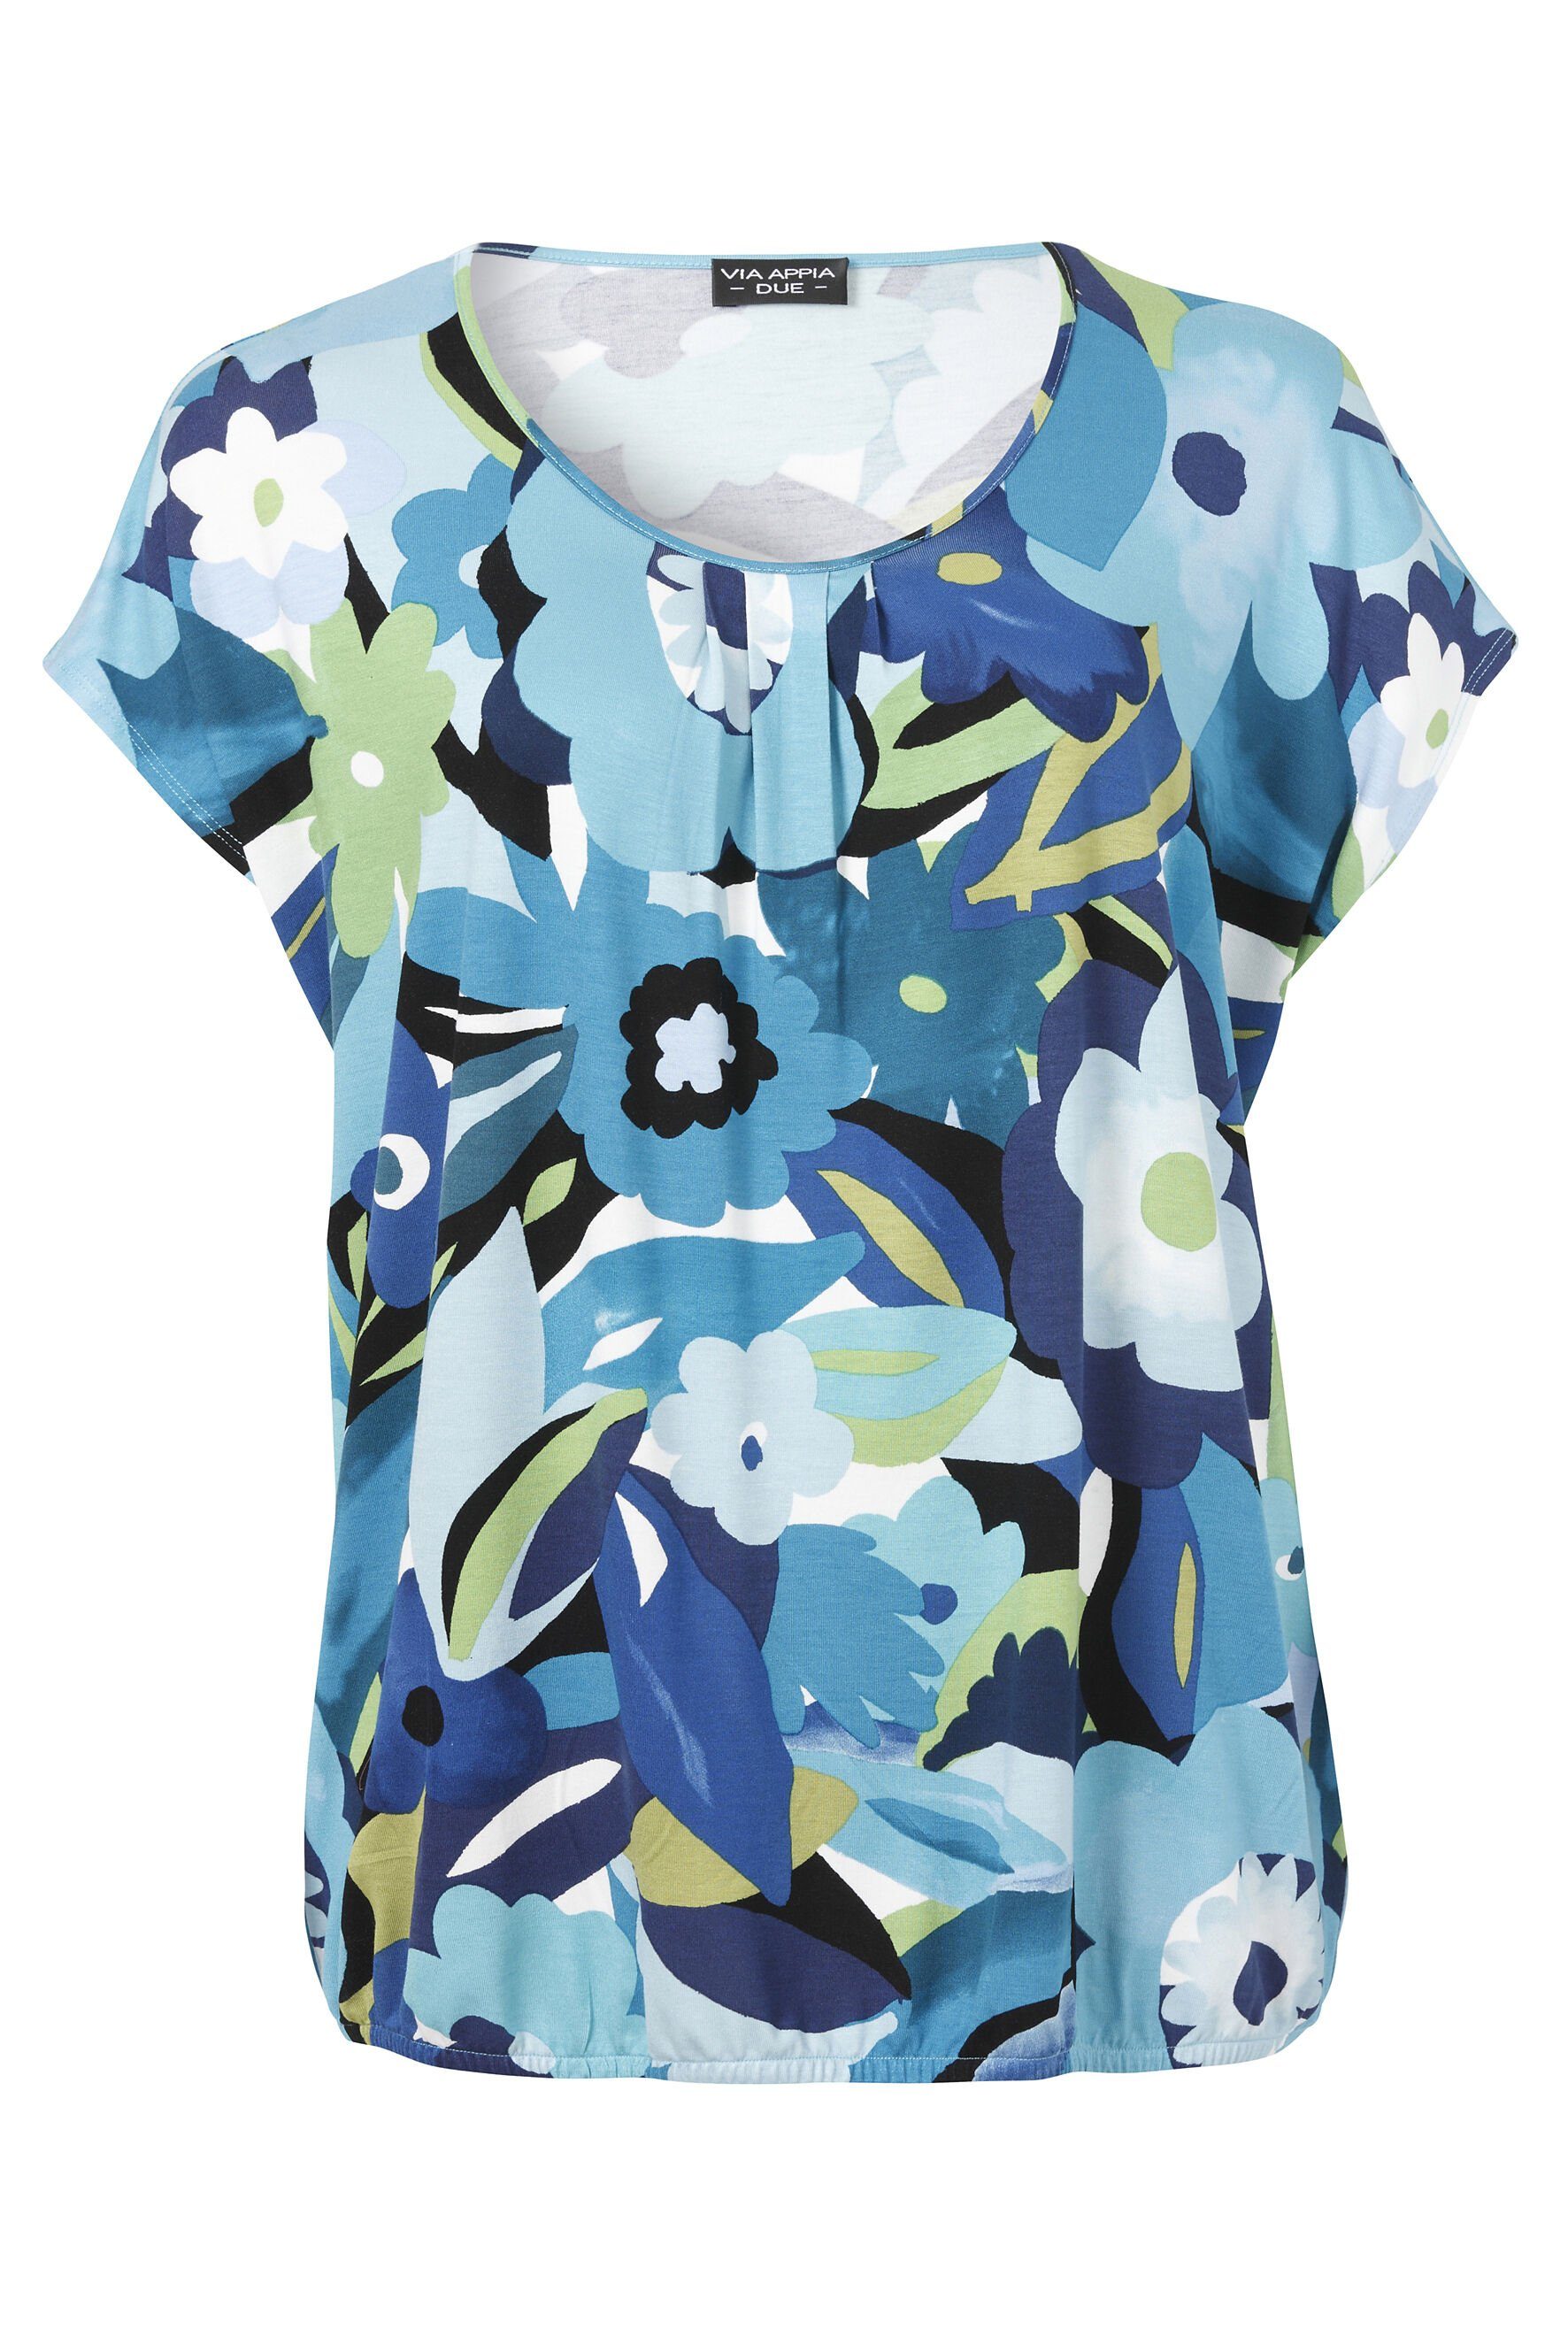 VIA APPIA DUE Print-Shirt in Allover-Muster, Allover-Muster